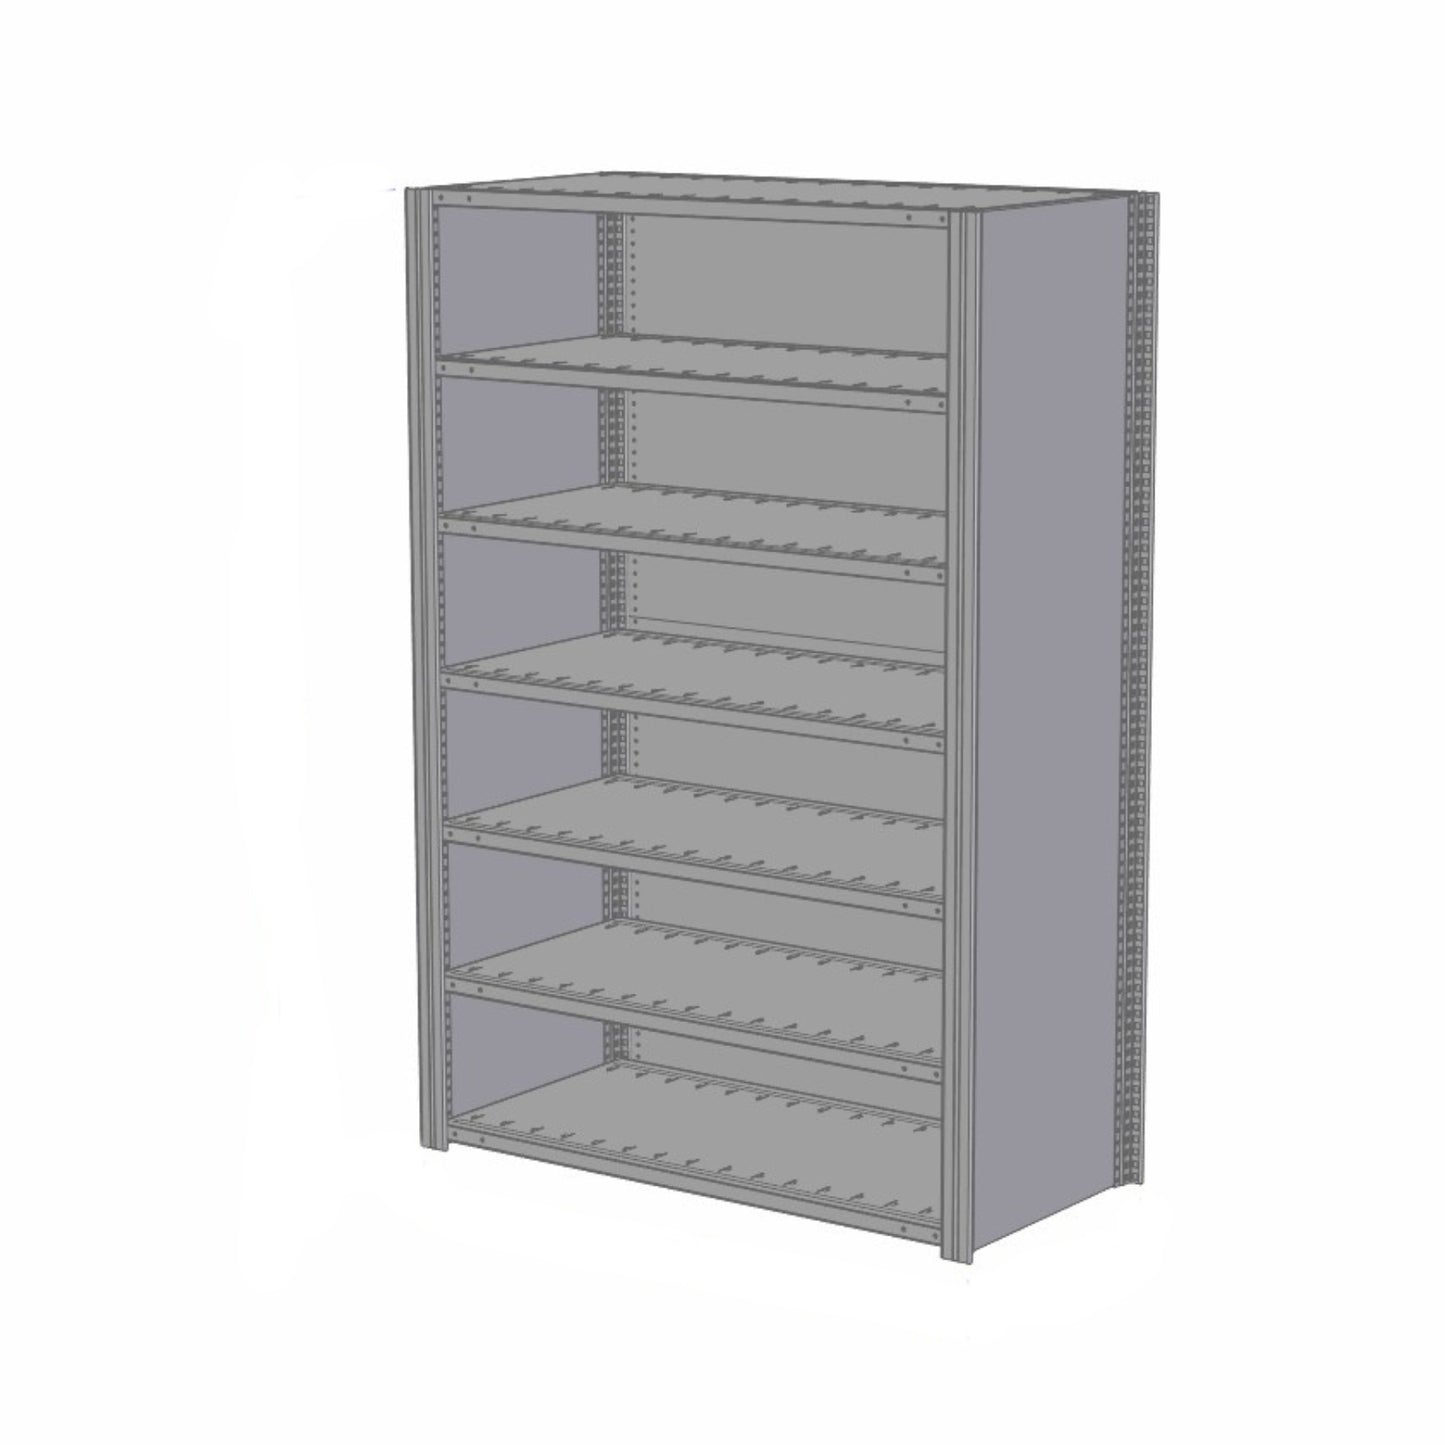 Shelving system 75 height x 48 width x 24 depth | Option: Open / Closed